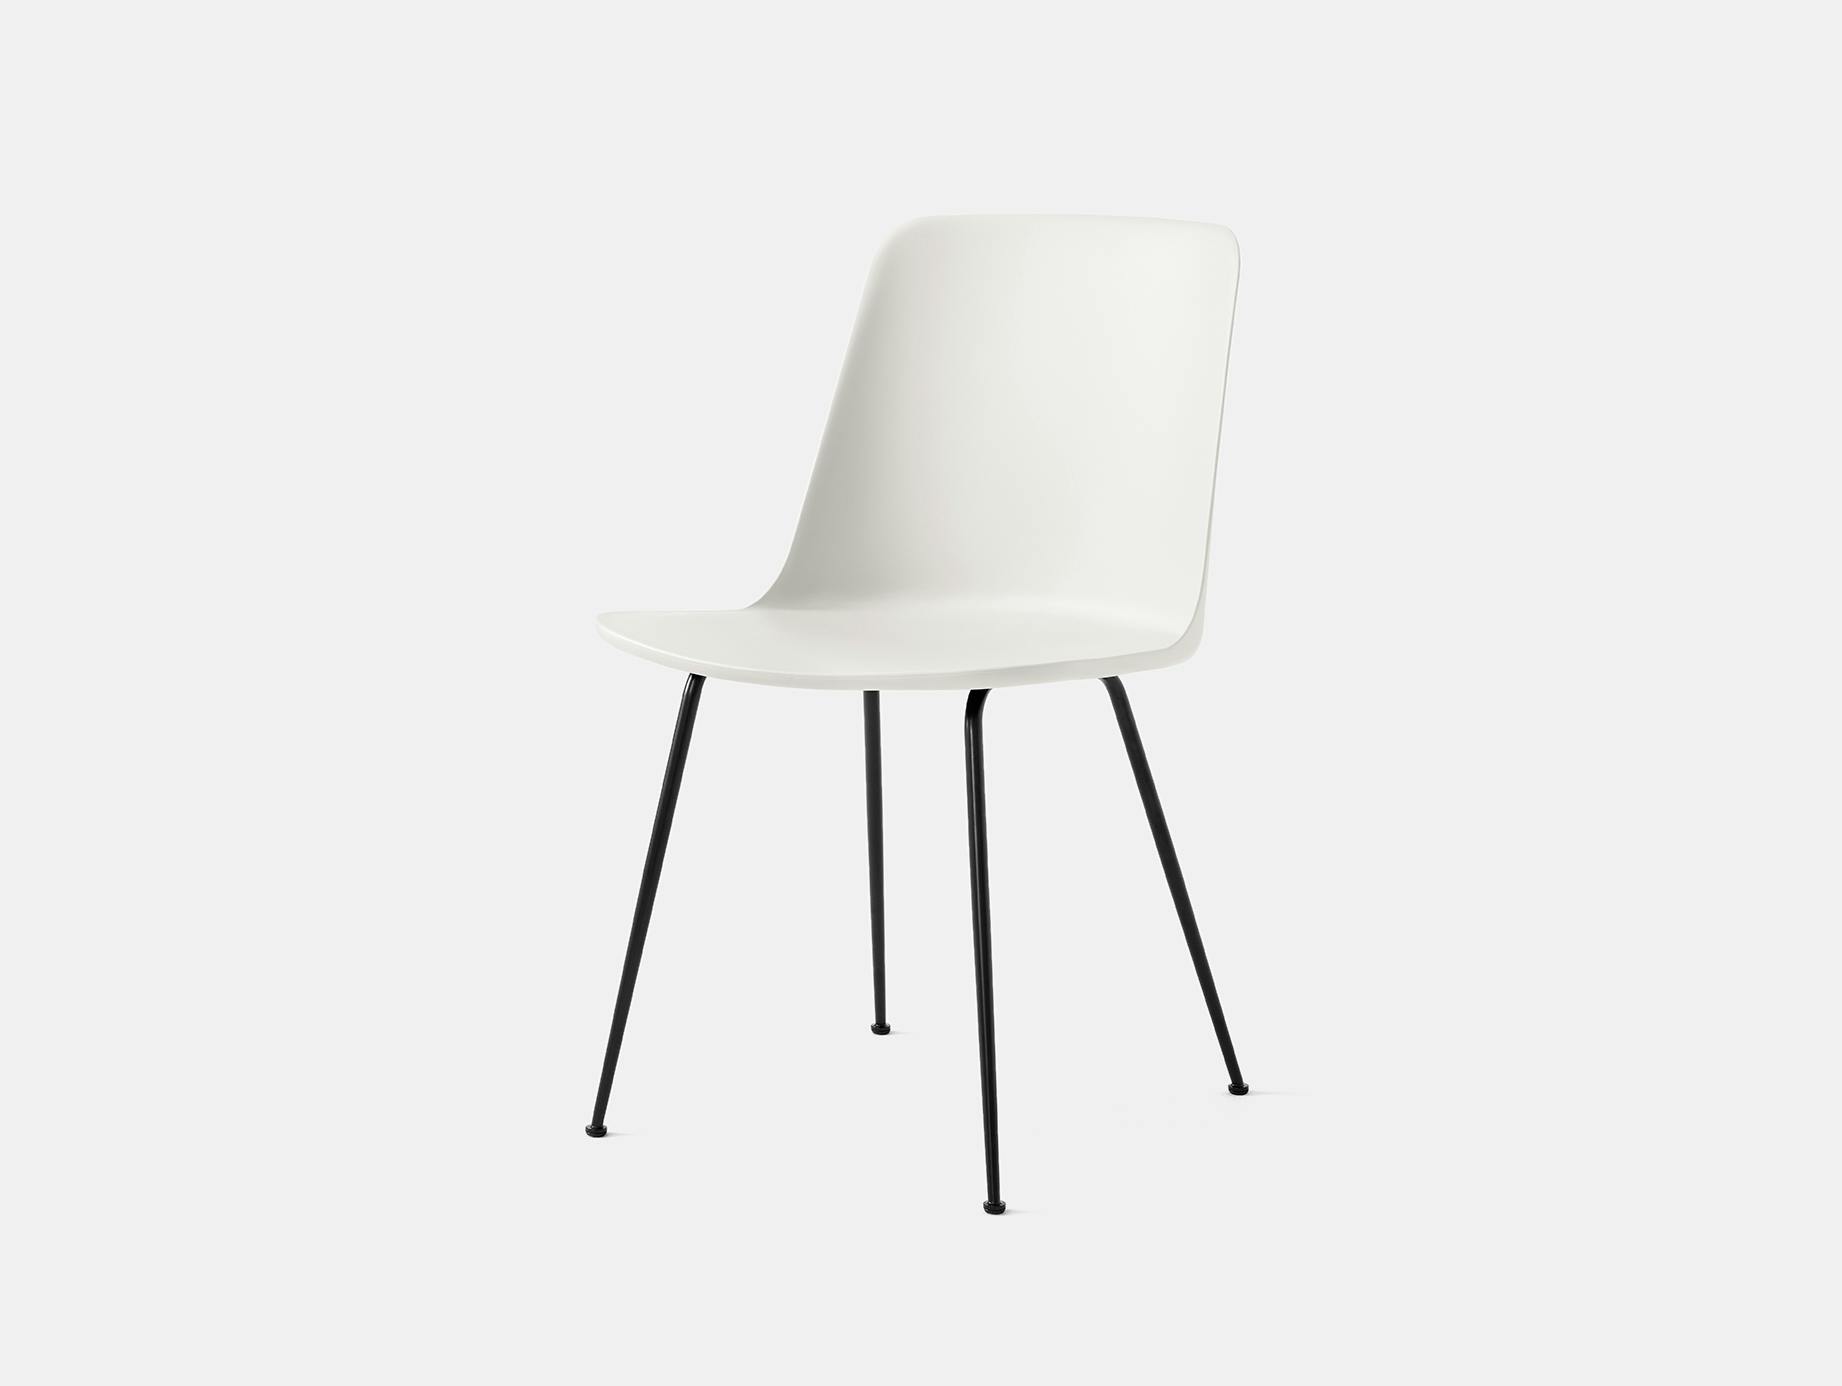 Andtradition rely chair four leg blk white